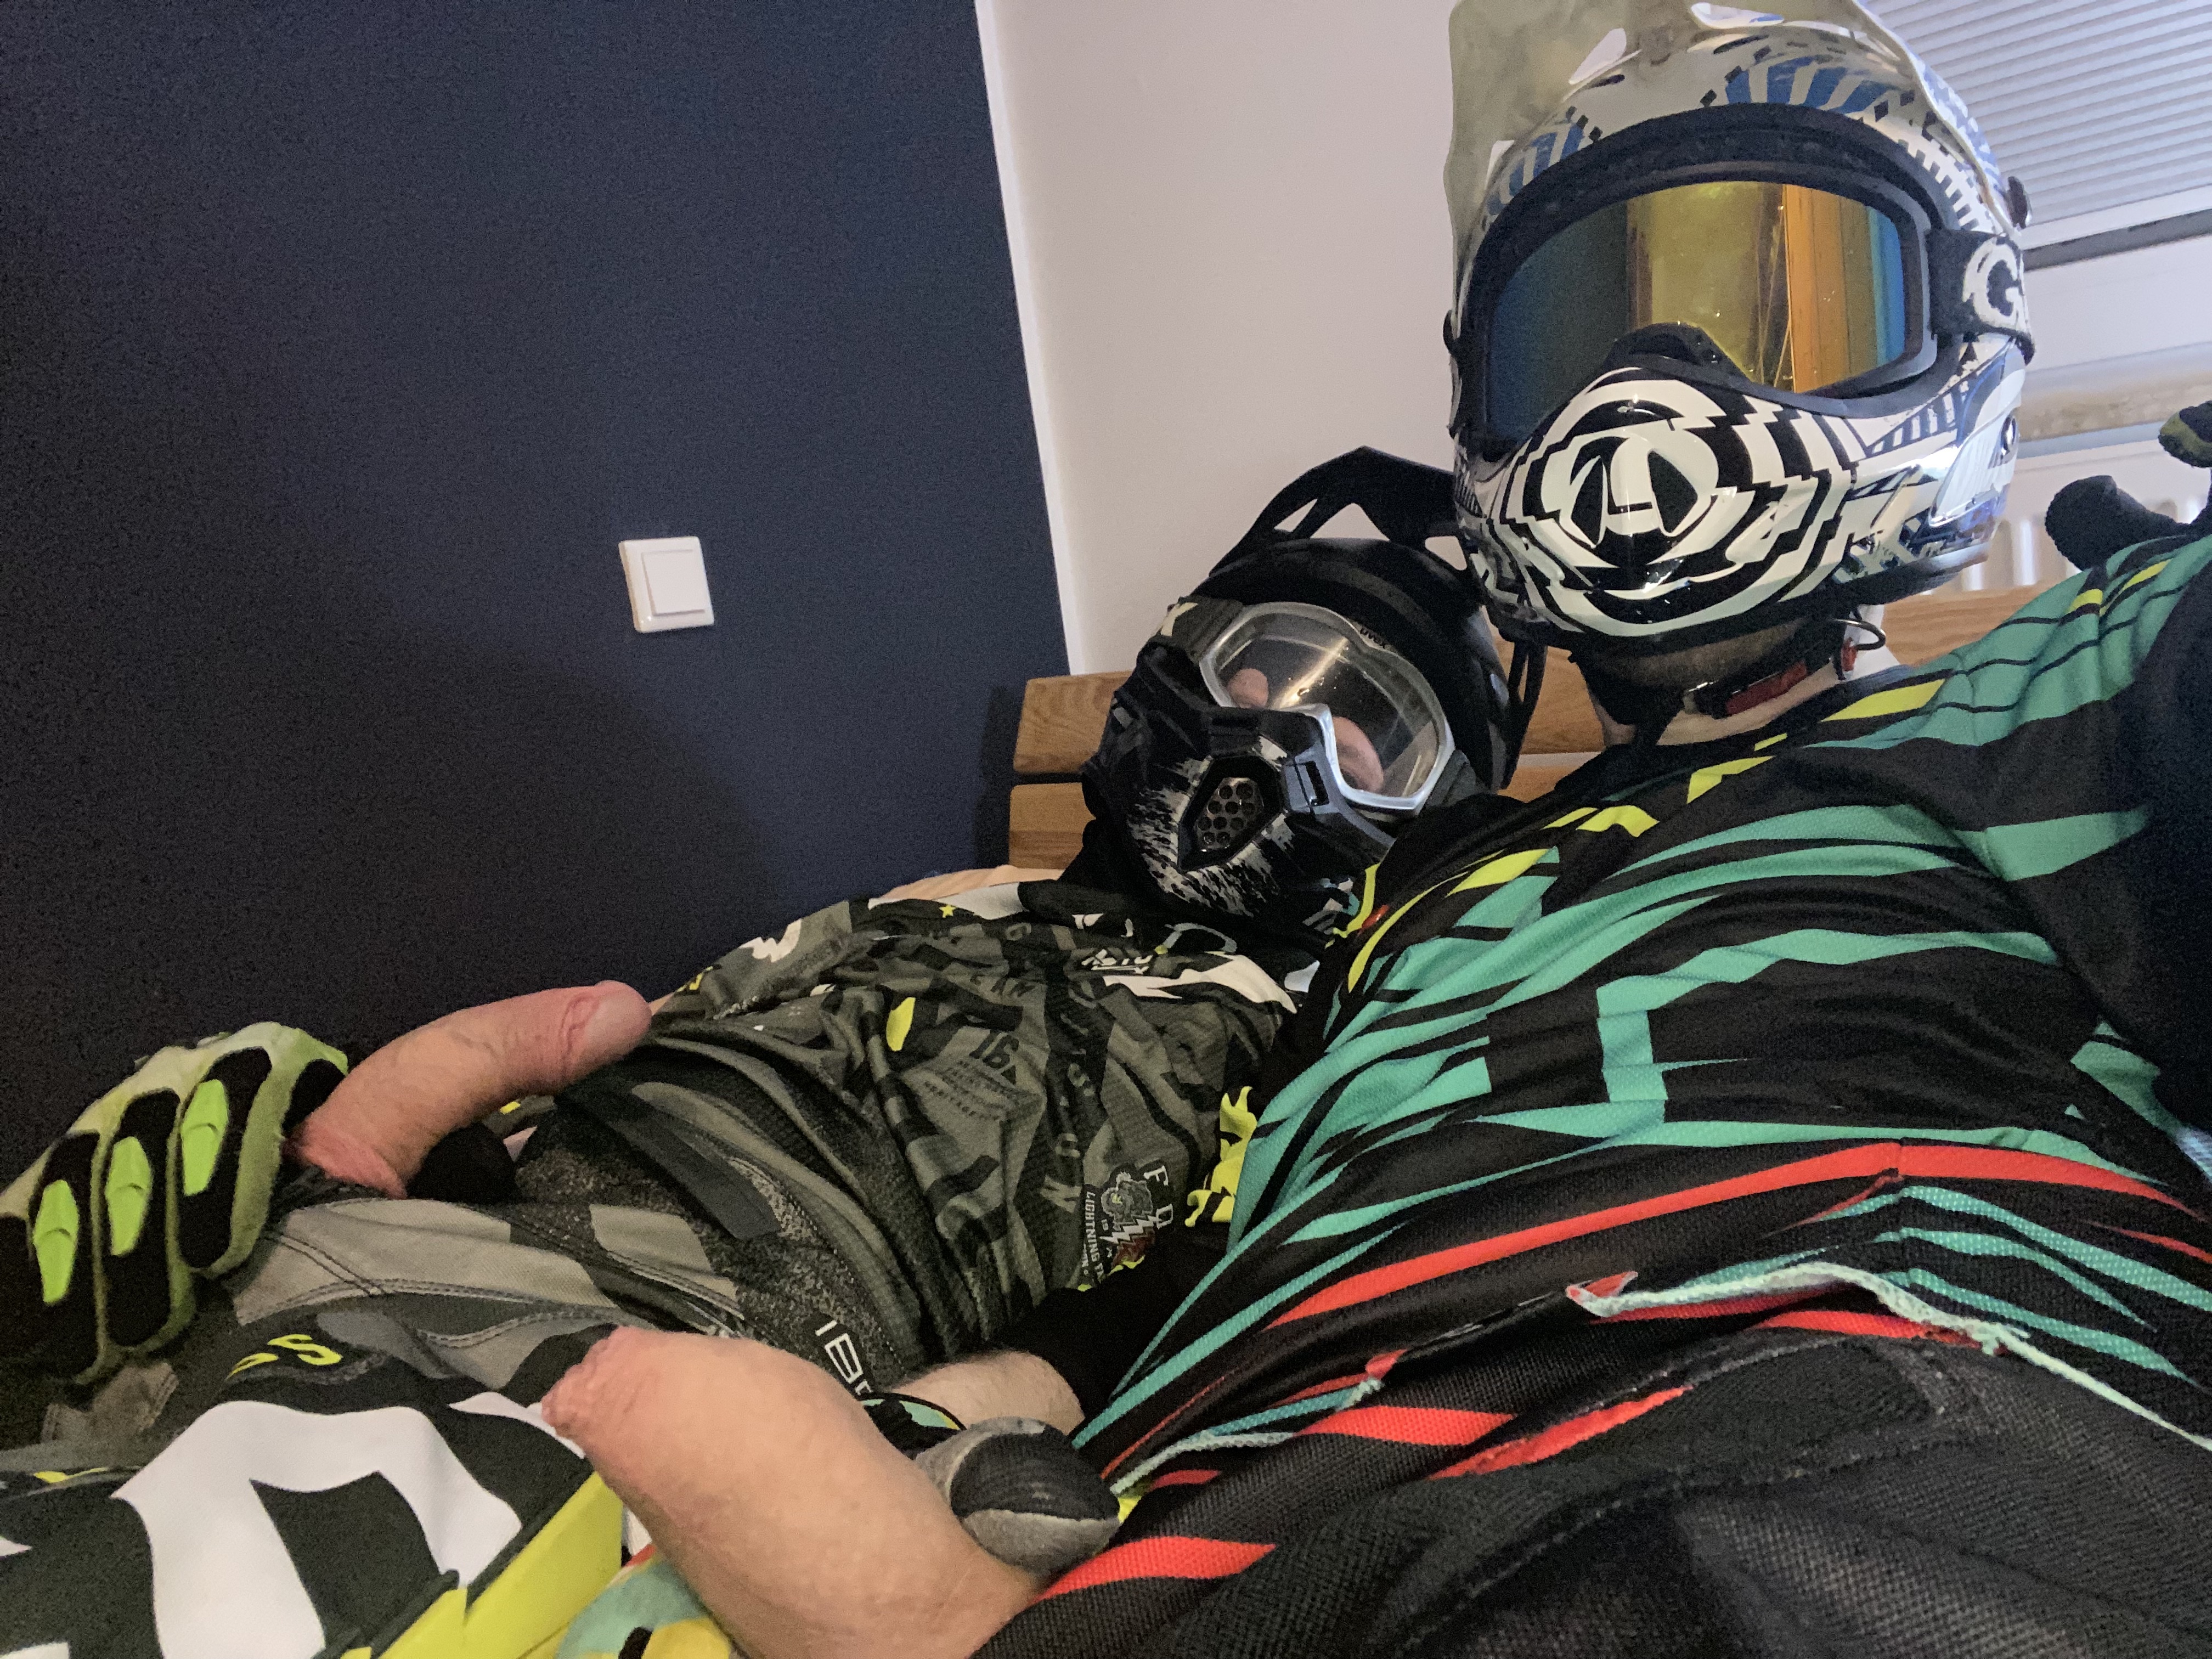 Pissing on each other in Motocross Gear